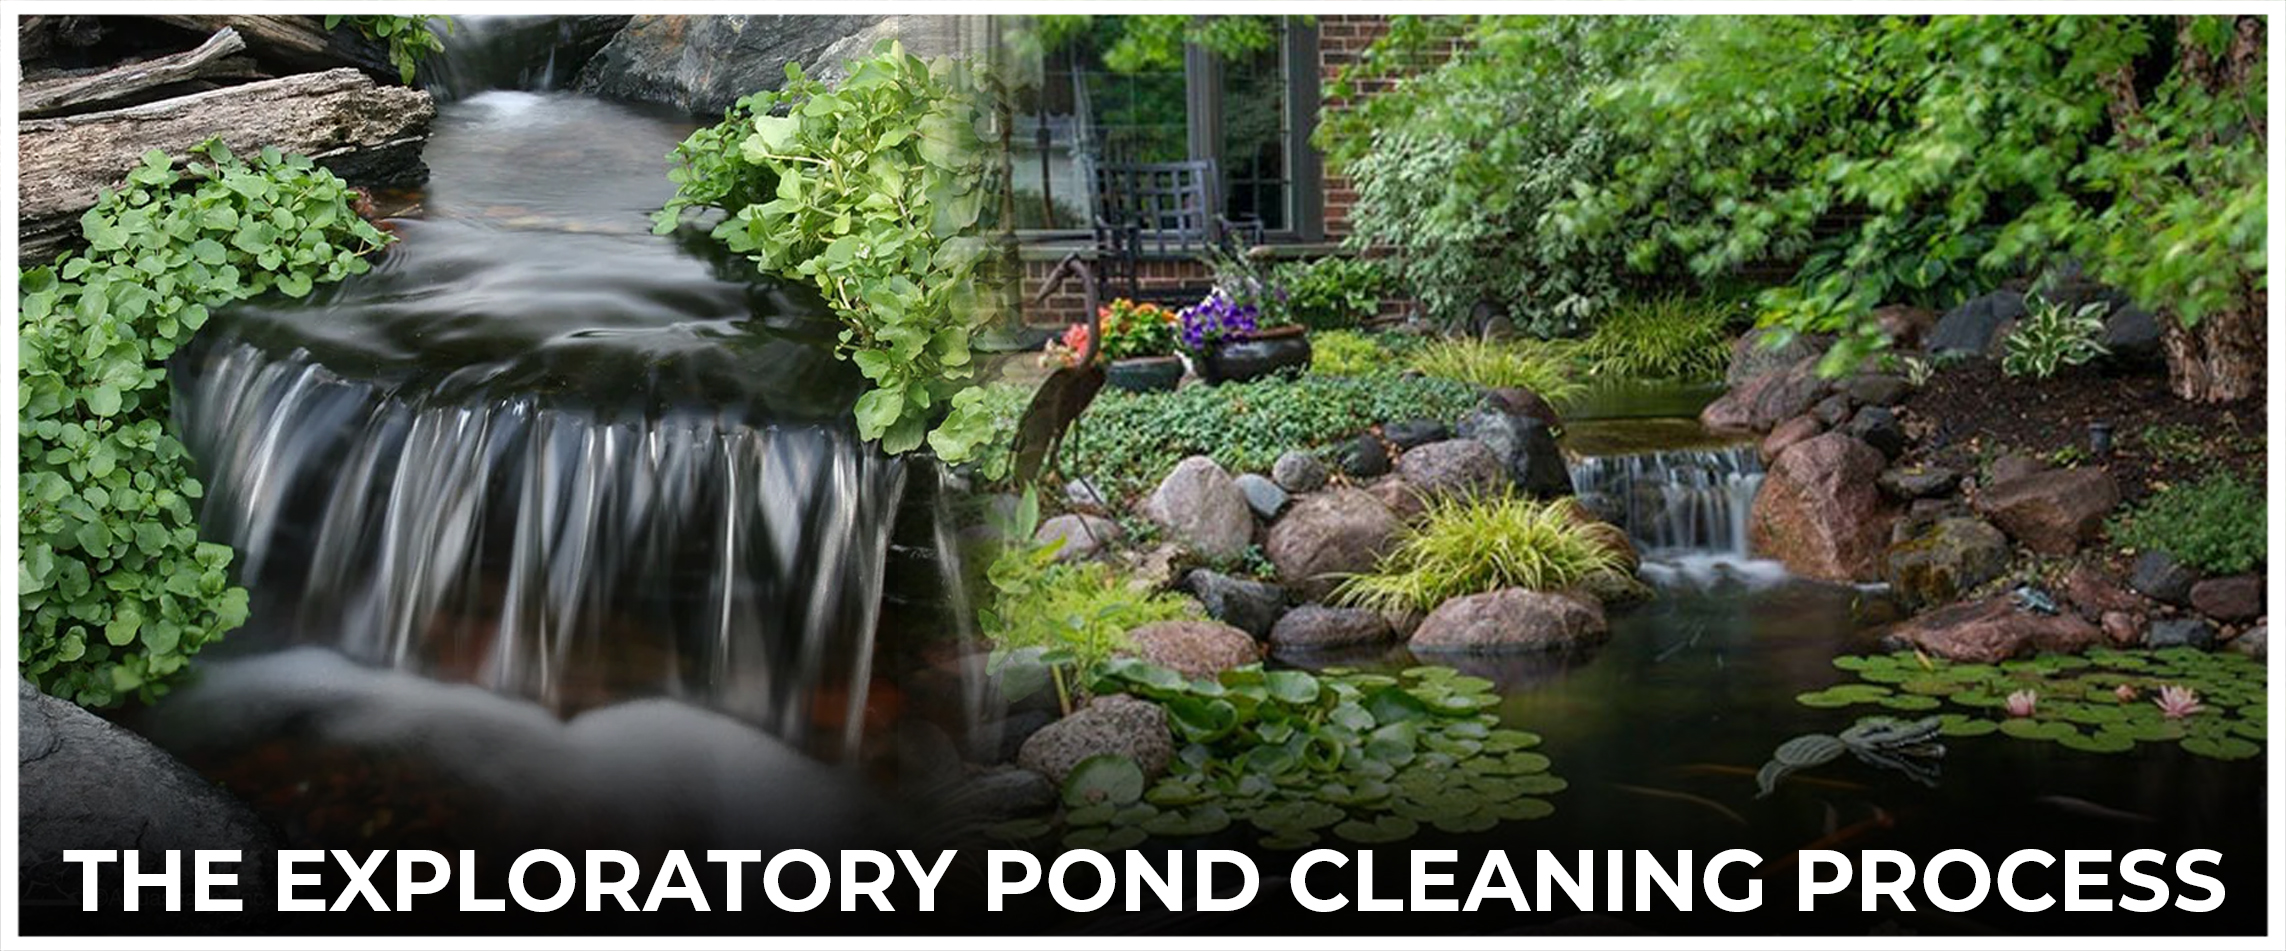  The Exploratory Pond Cleaning Process